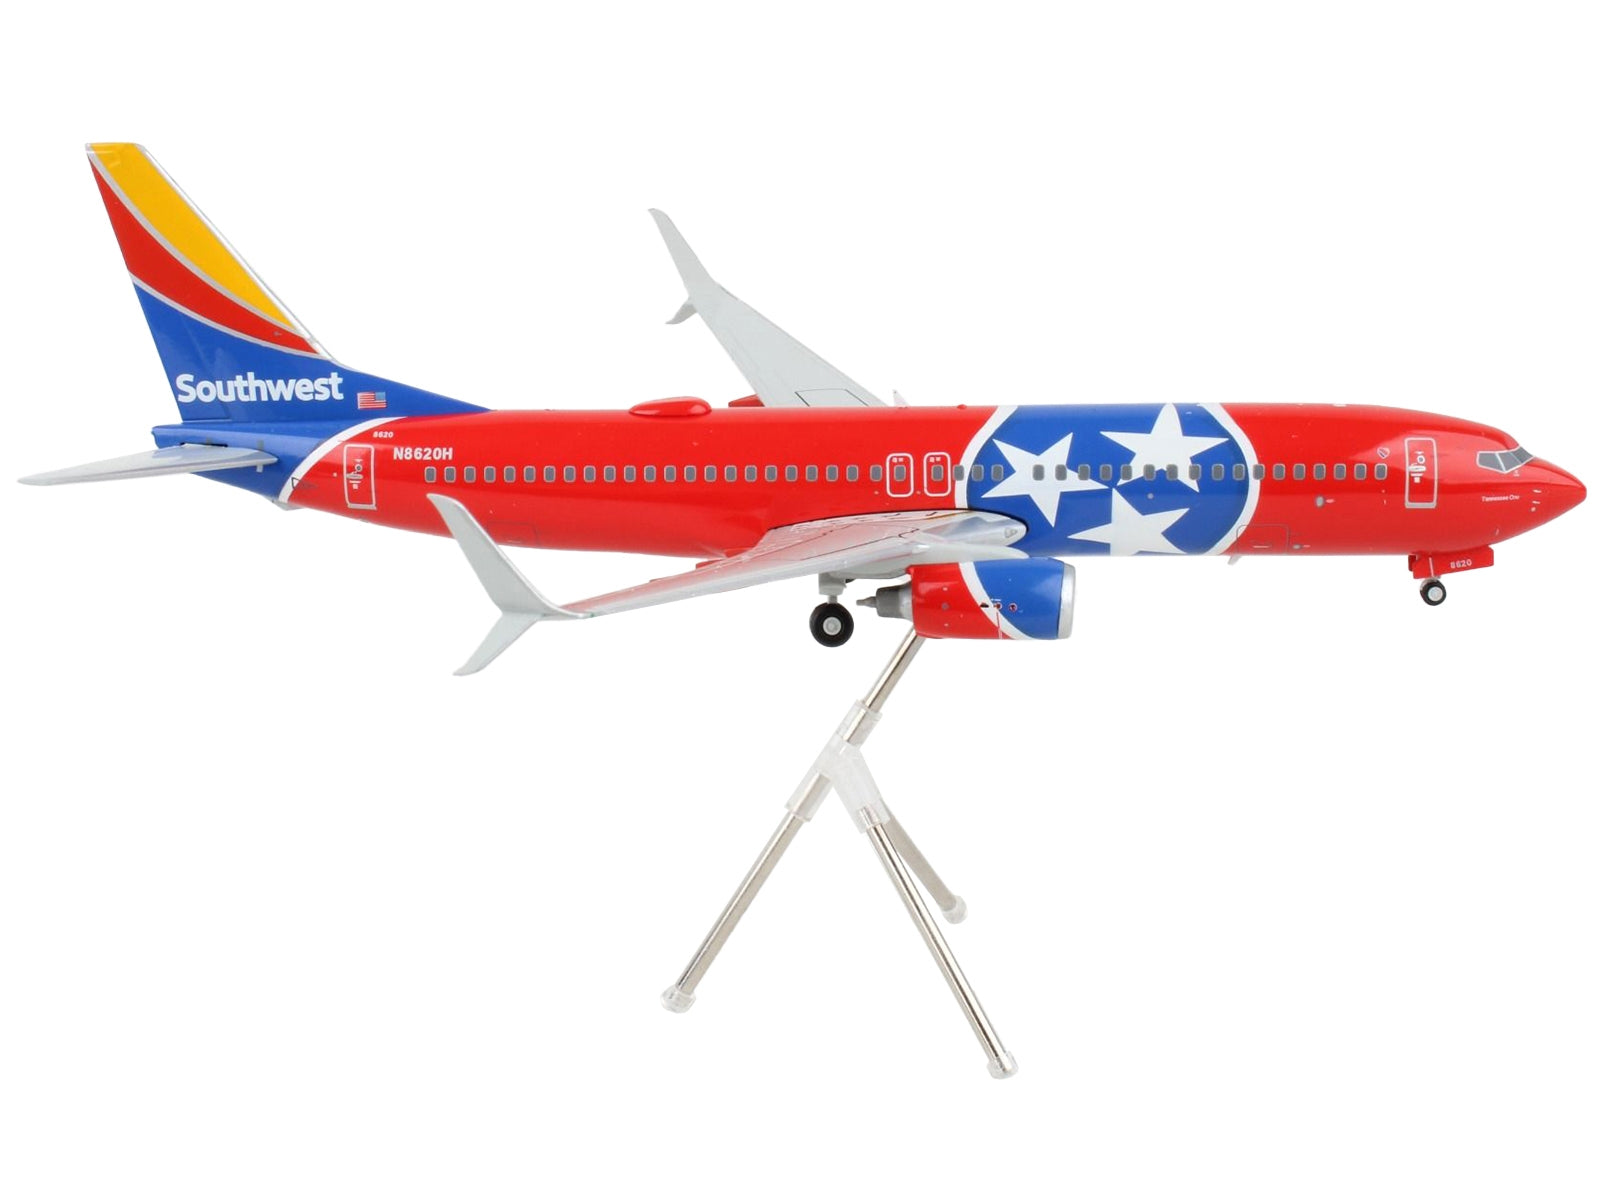 Boeing 737-800 Commercial Aircraft "Southwest Airlines - Tennessee One"